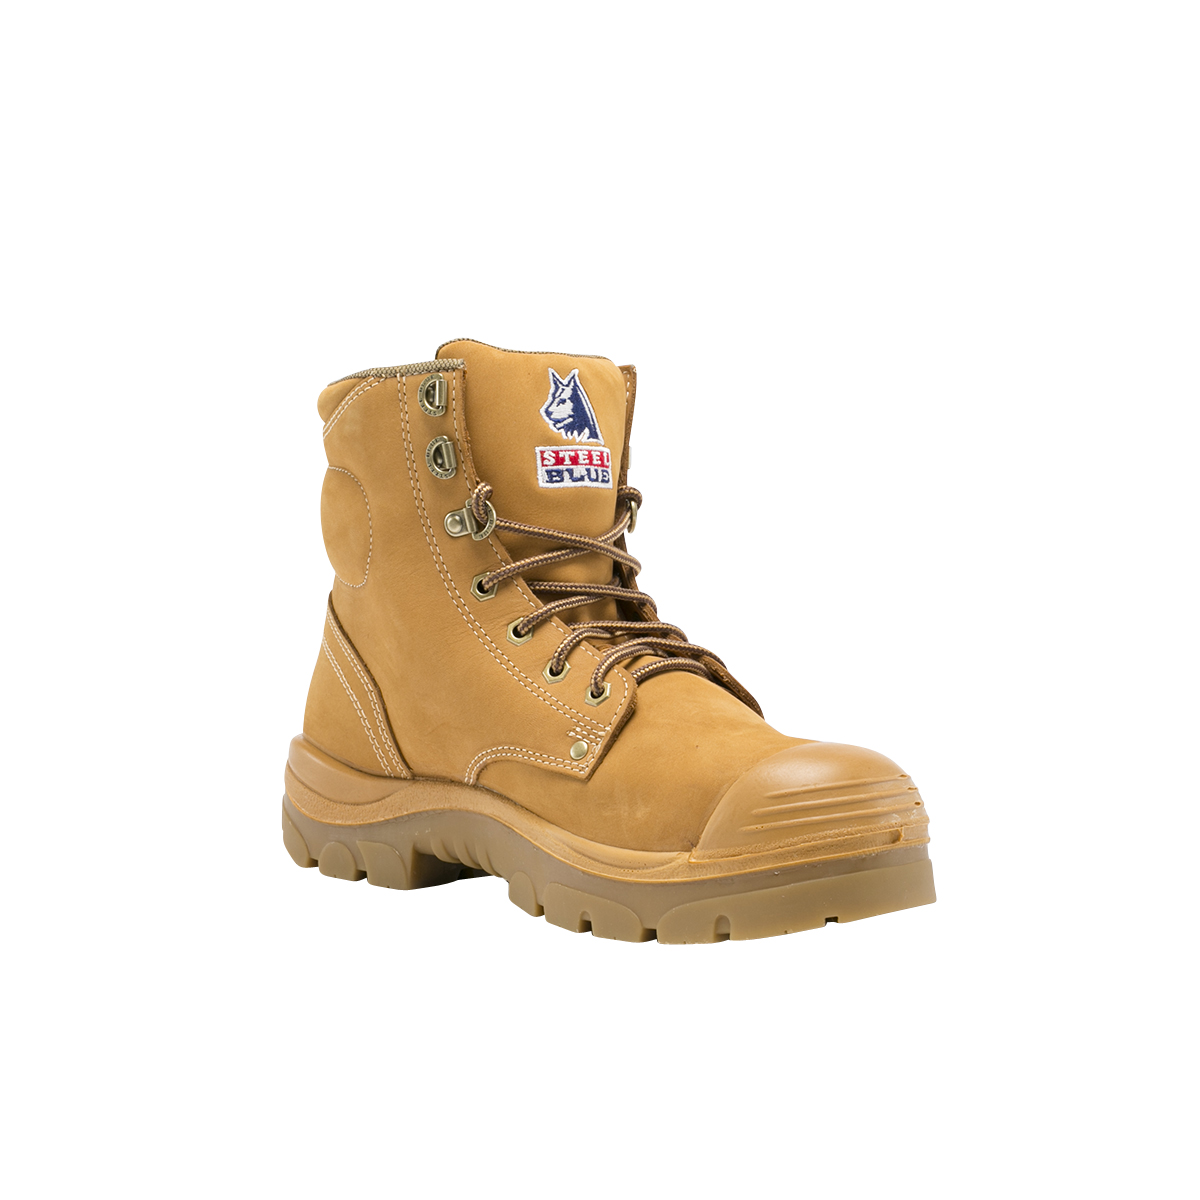 SAFETY BOOT ARGYLE BUMPCAP 10 -ANKLE LACE UP WHEAT NITRILE